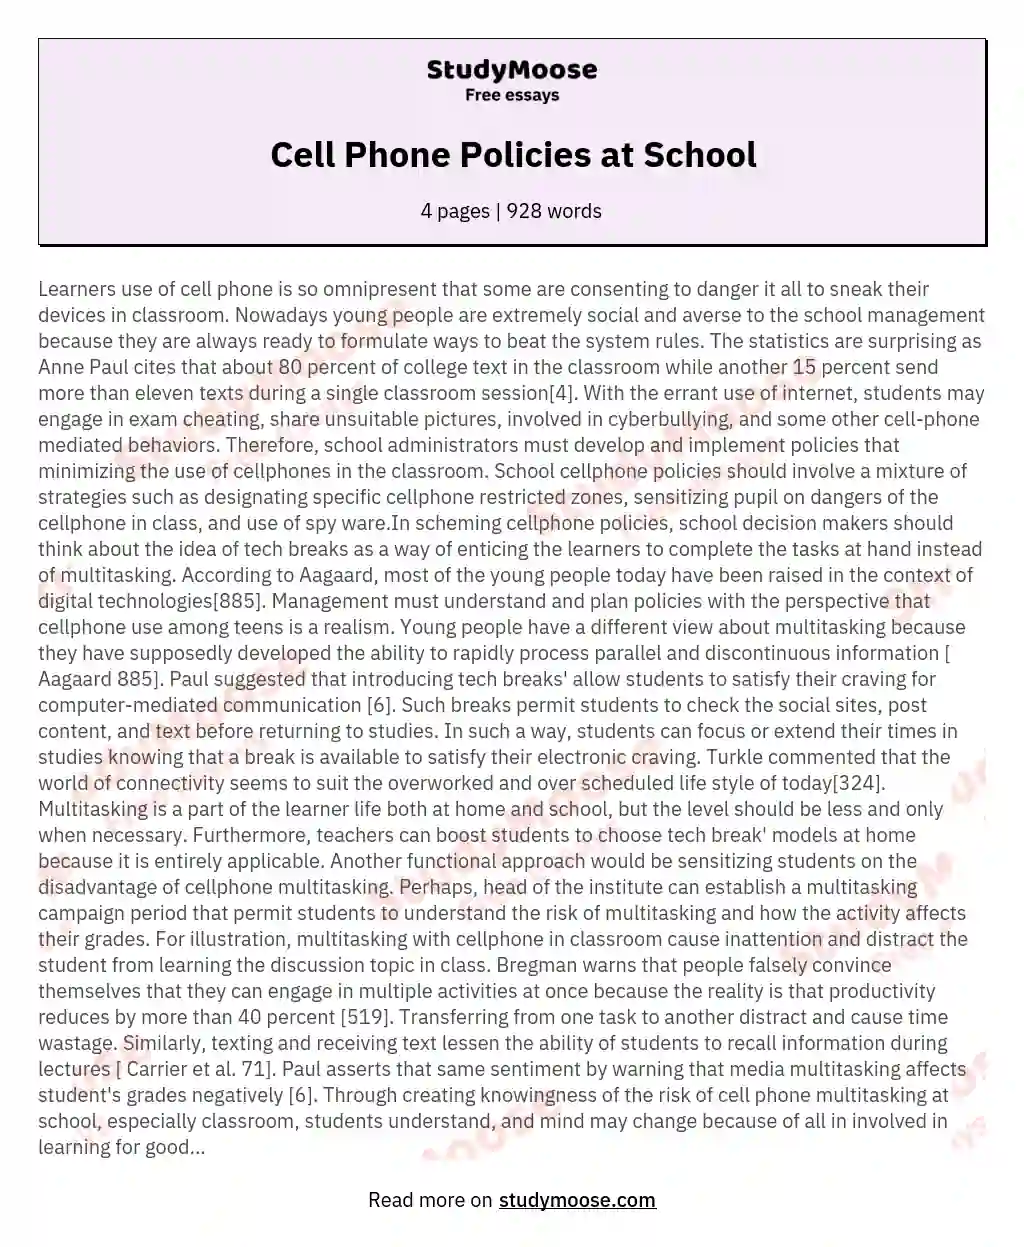 Cell Phone Policies at School